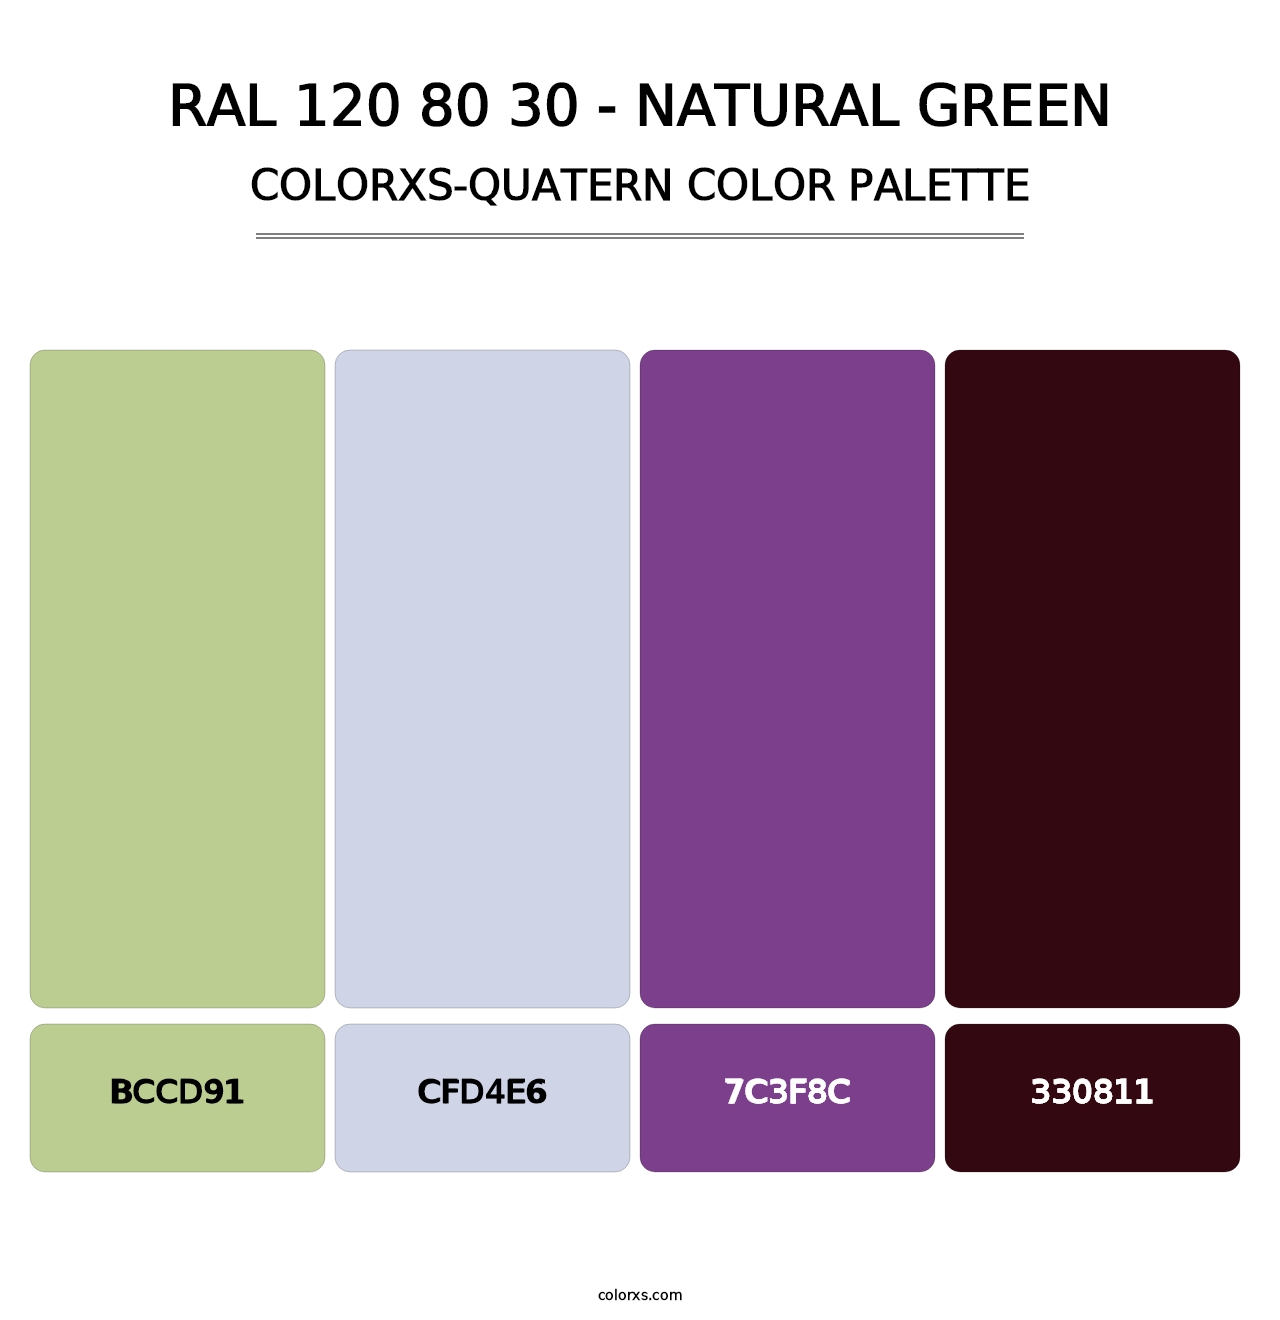 RAL 120 80 30 - Natural Green - Colorxs Quatern Palette